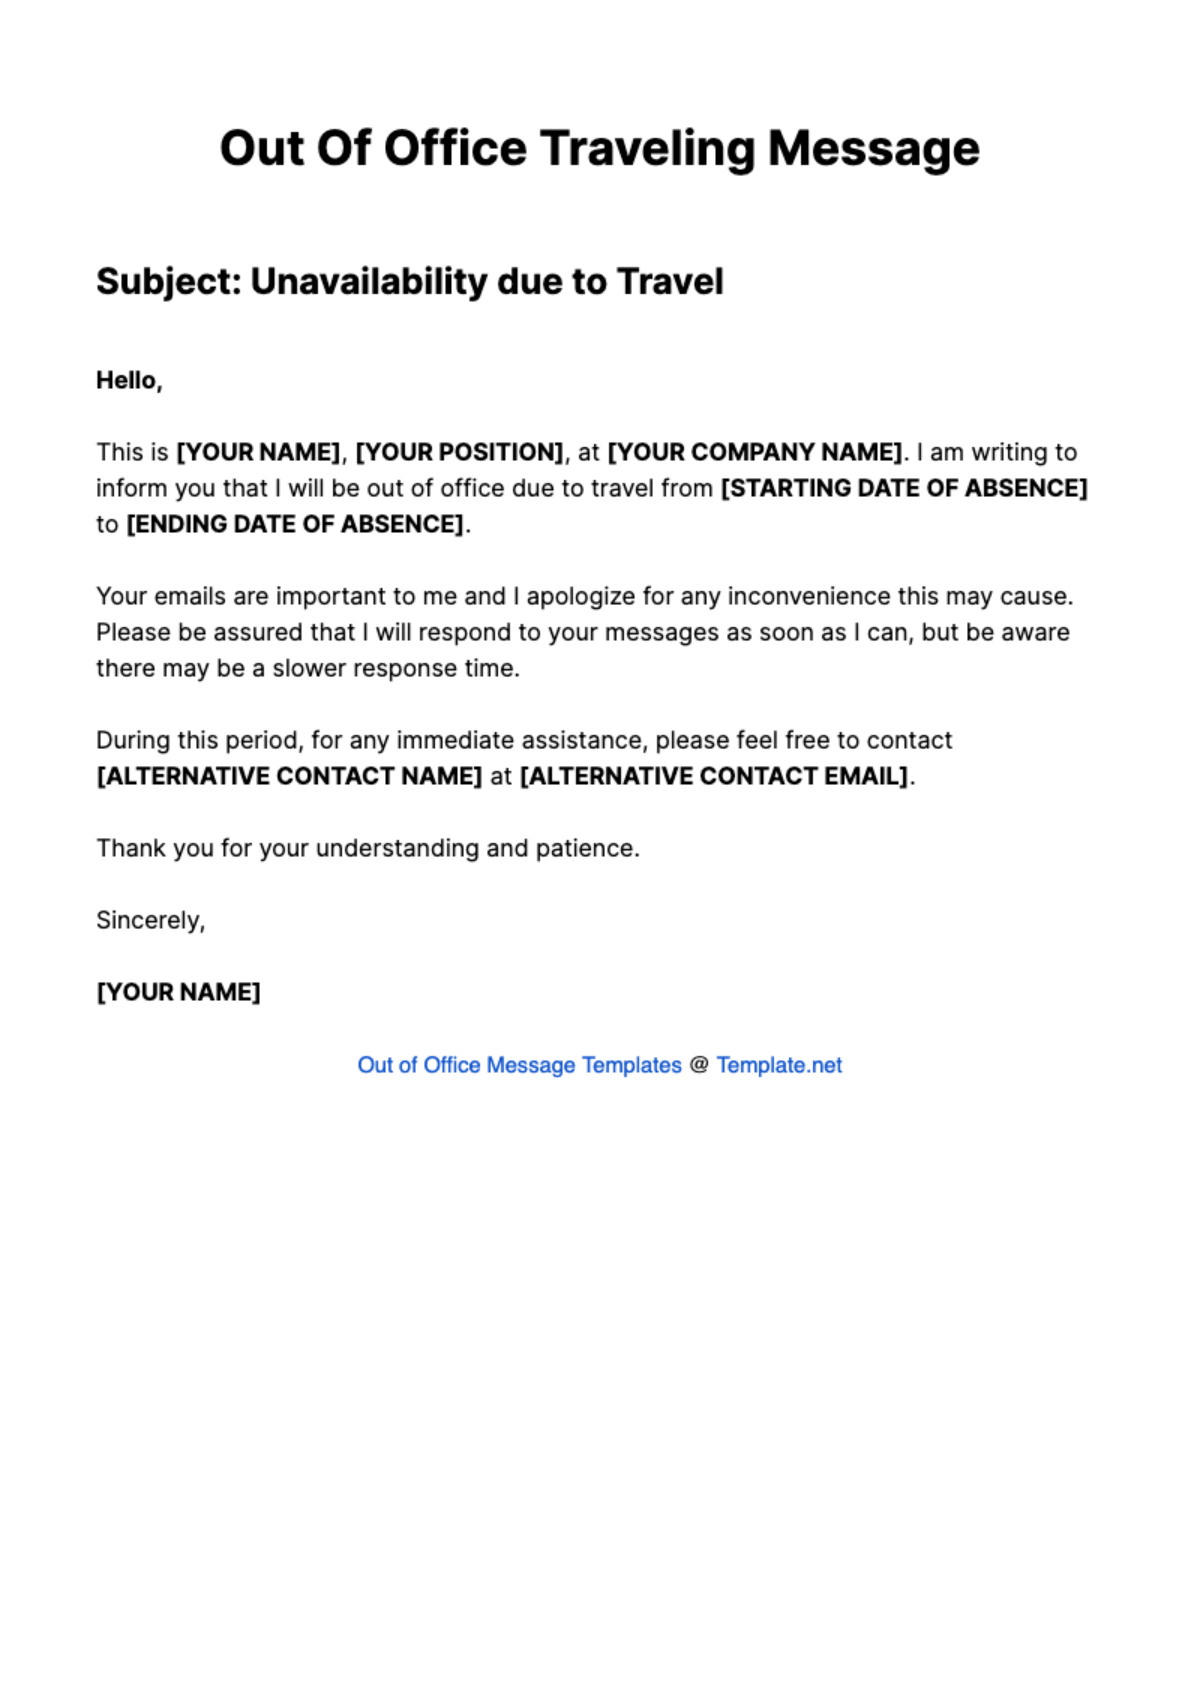 Out Of Office Traveling Message Template